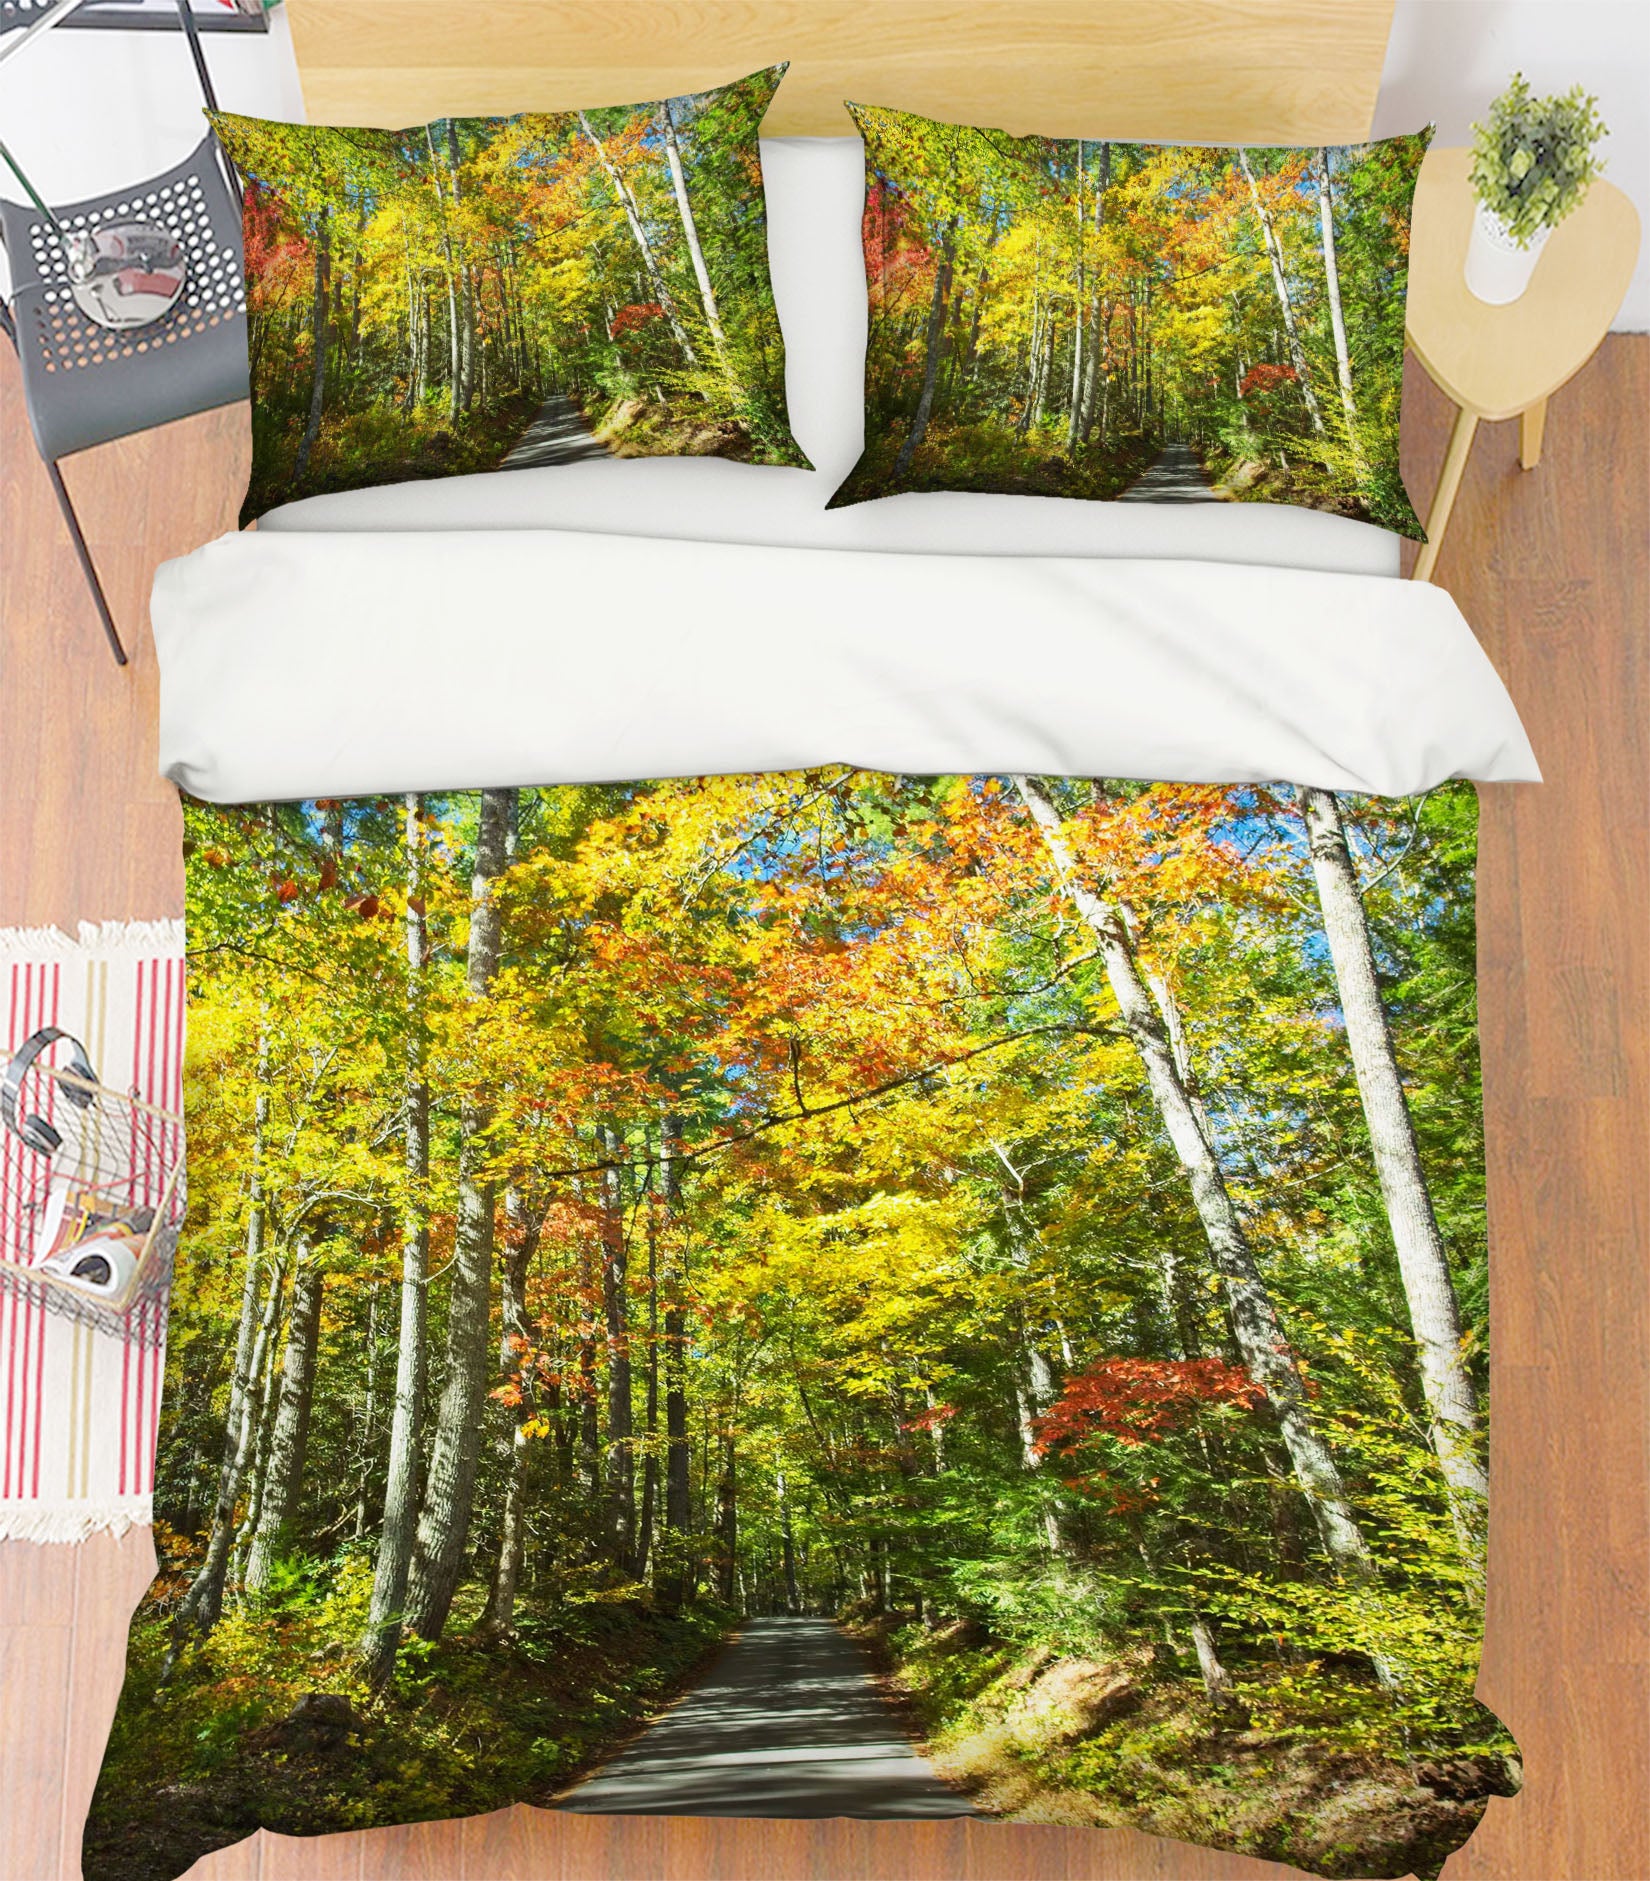 3D Forest Path 2119 Kathy Barefield Bedding Bed Pillowcases Quilt